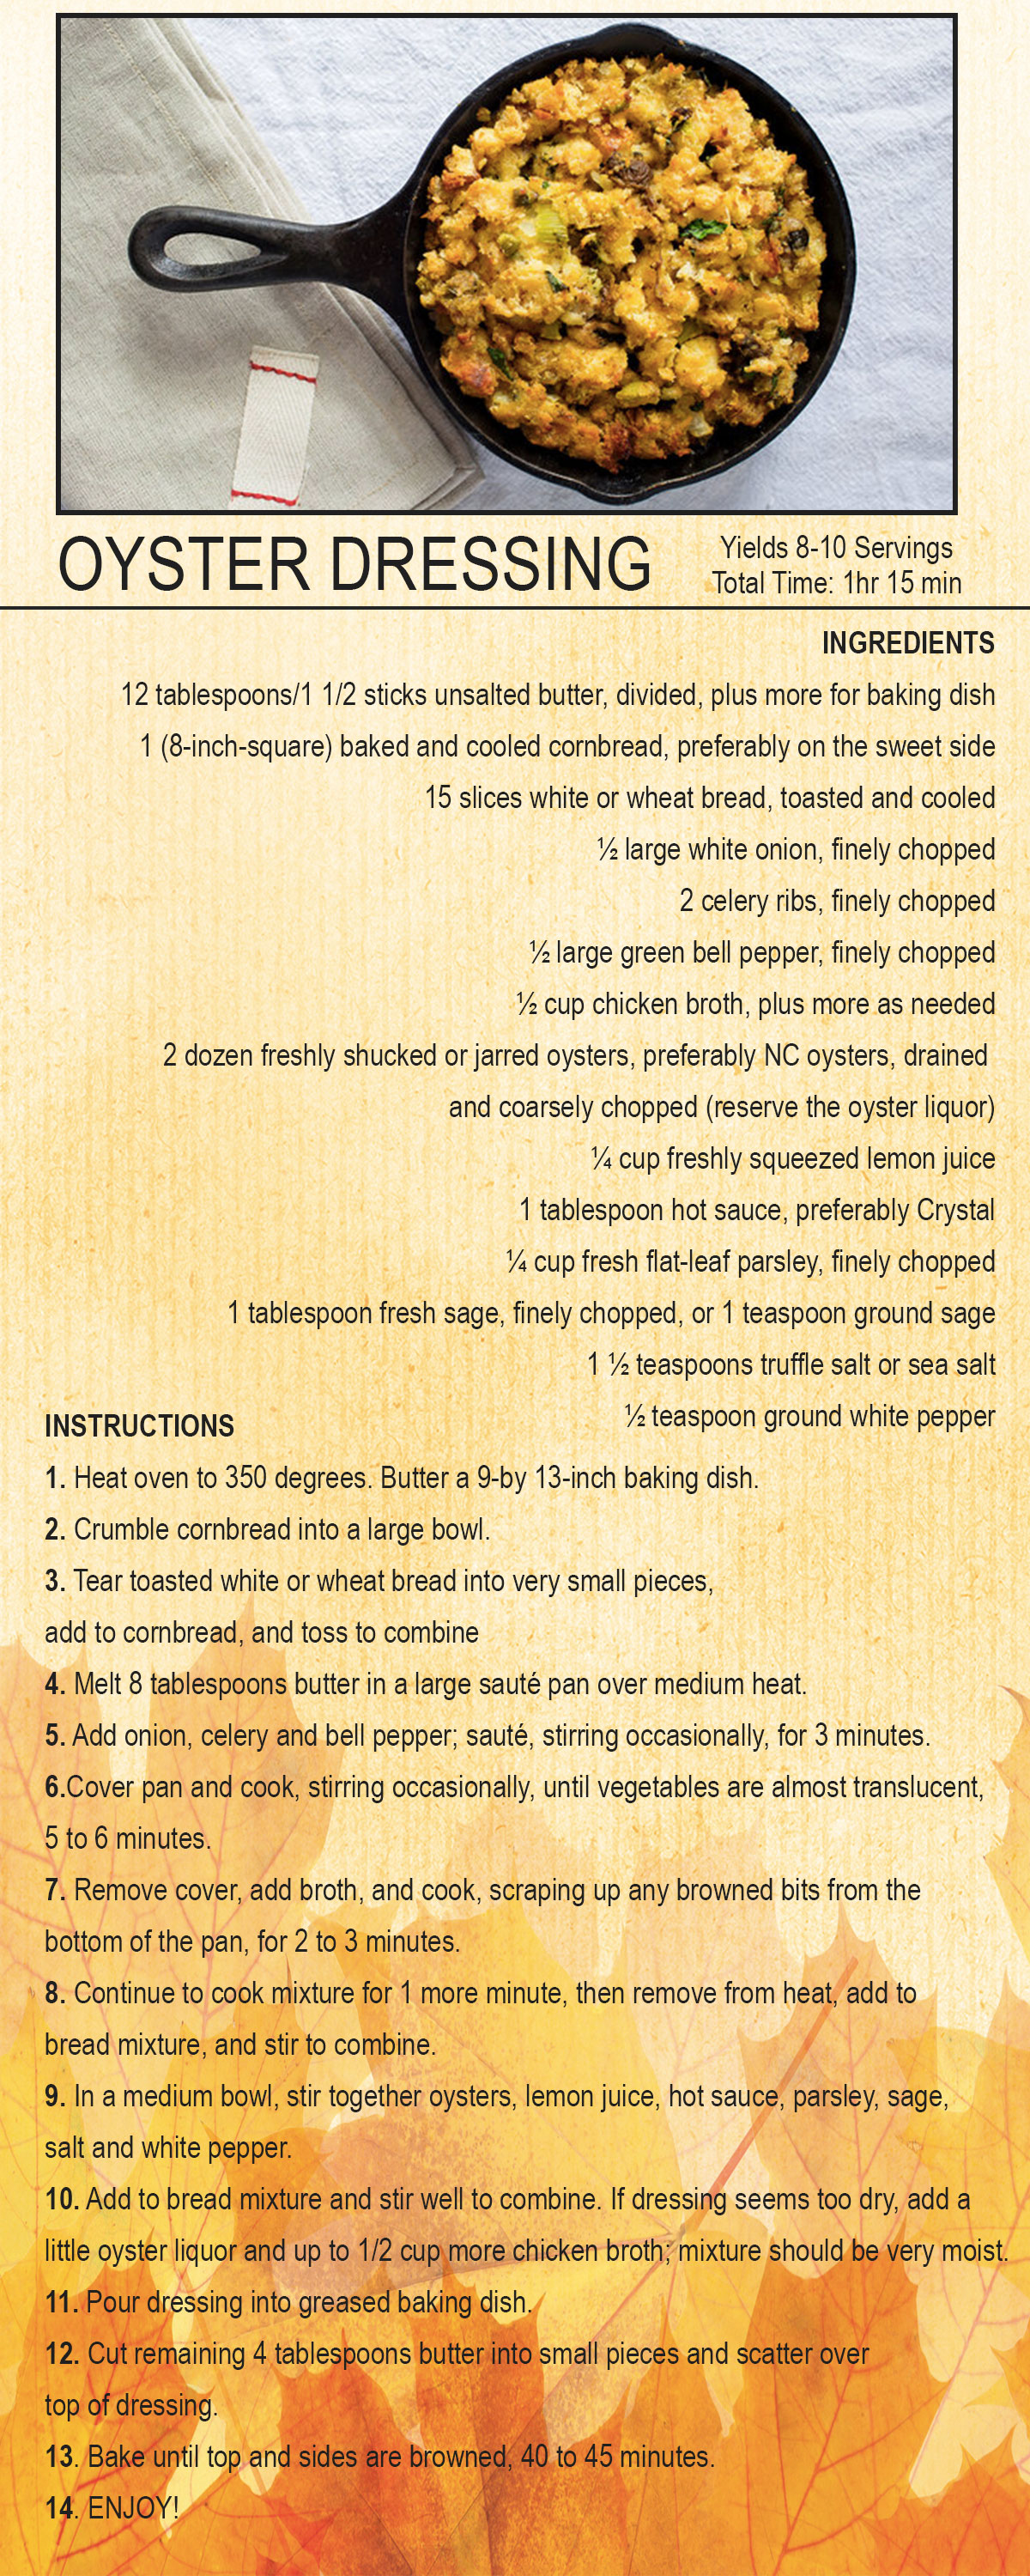 Oyster Dressing Recipe Card